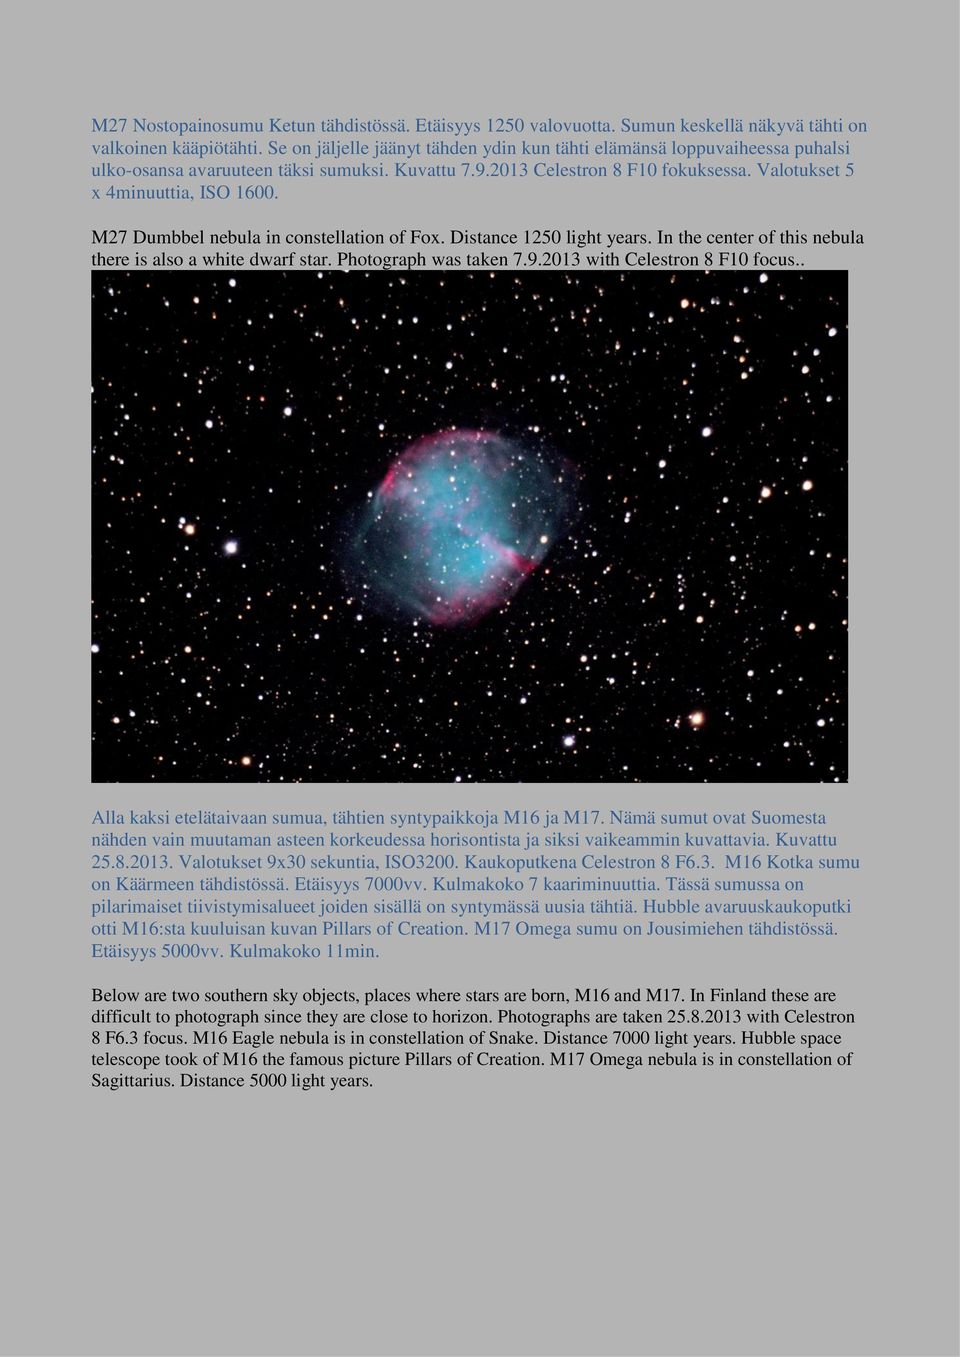 M27 Dumbbel nebula in constellation of Fox. Distance 1250 light years. In the center of this nebula there is also a white dwarf star. Photograph was taken 7.9.2013 with Celestron 8 F10 focus.